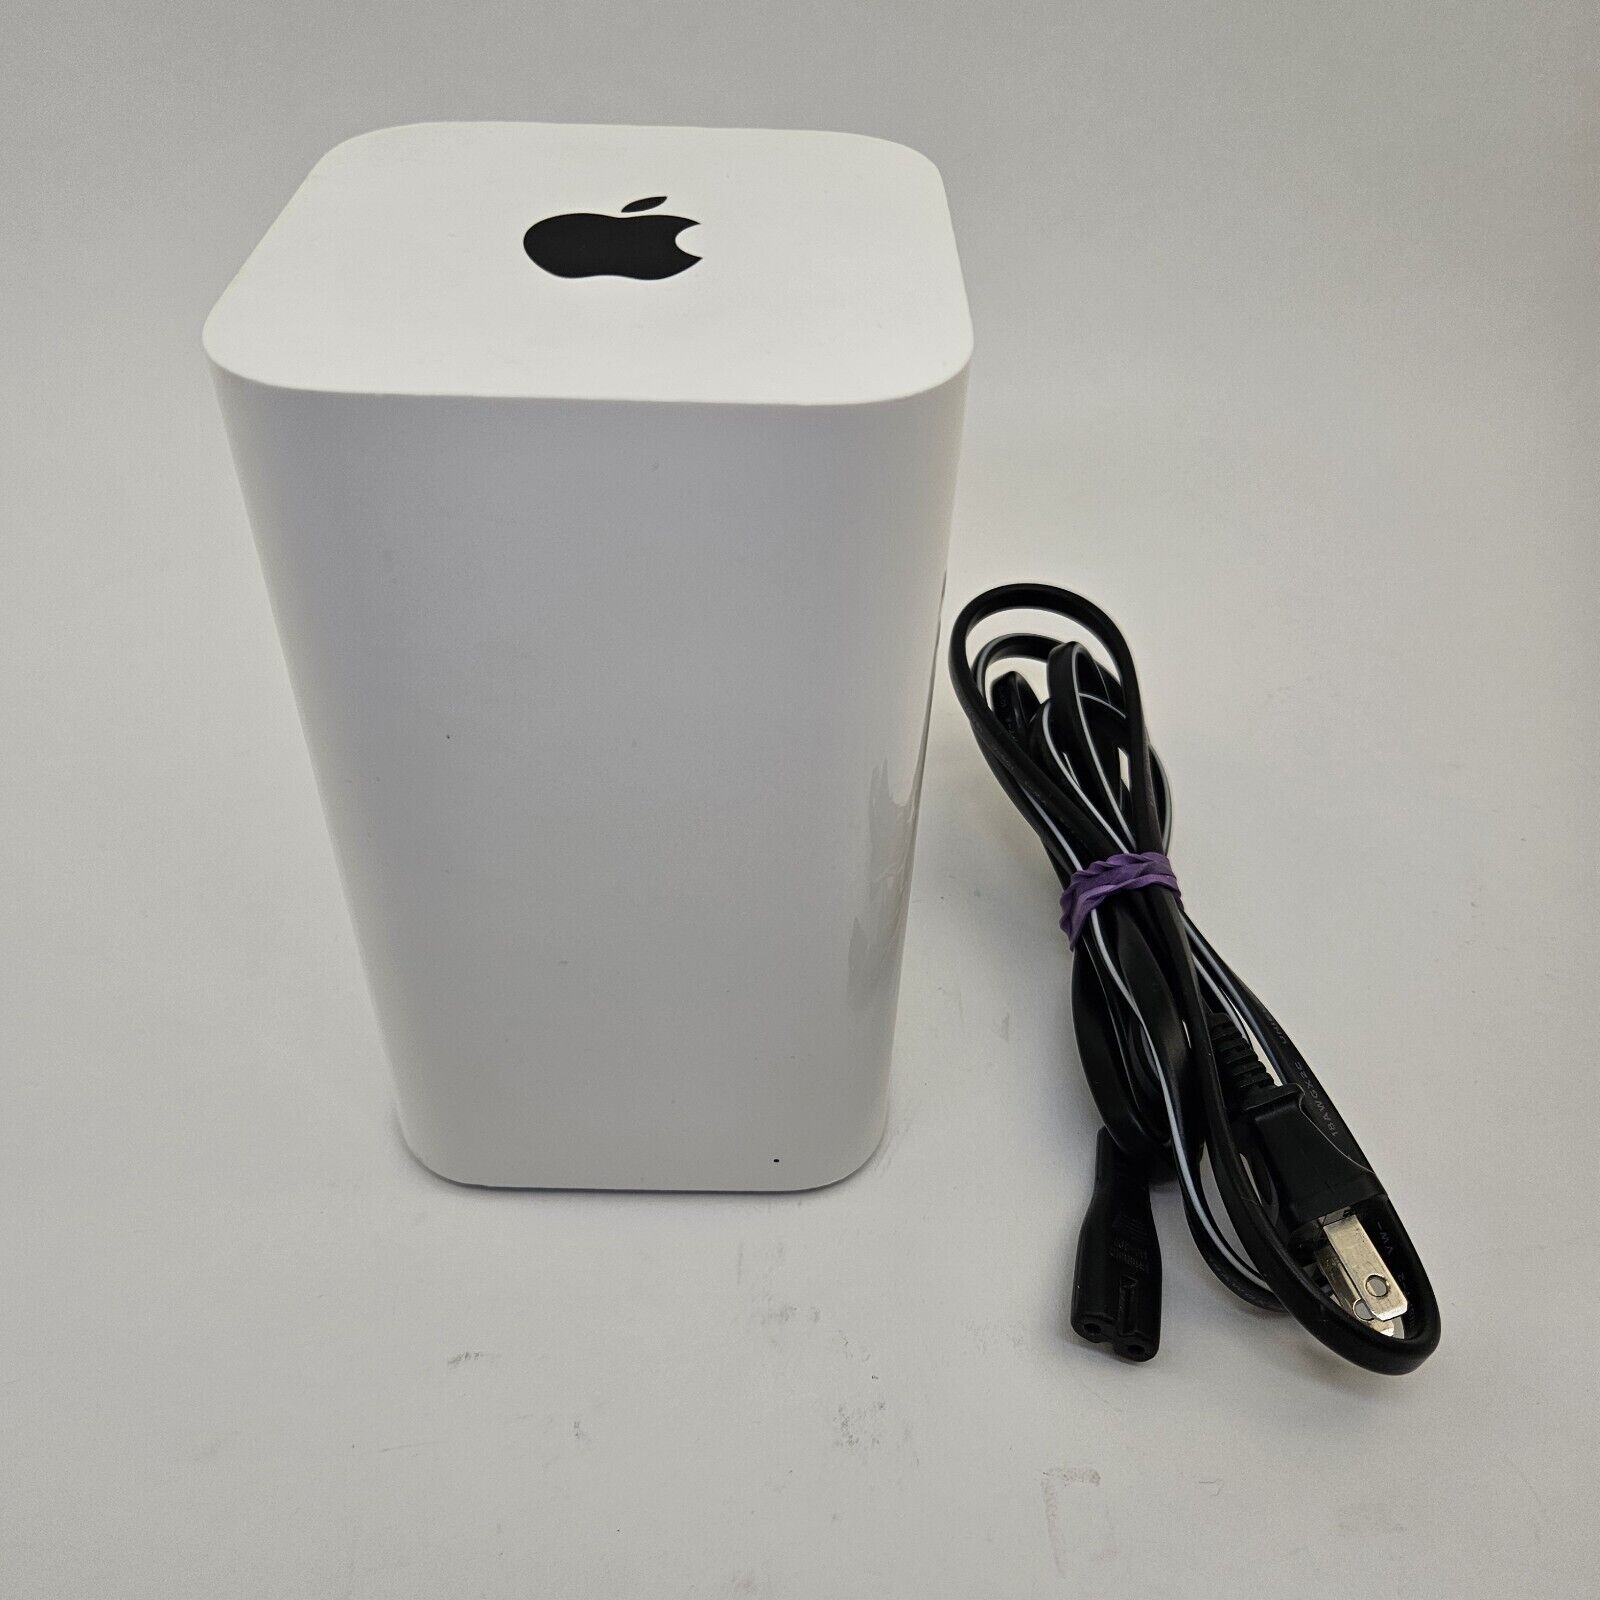 Apple A1521 AirPort Extreme Base Station Wireless Router - Tested 